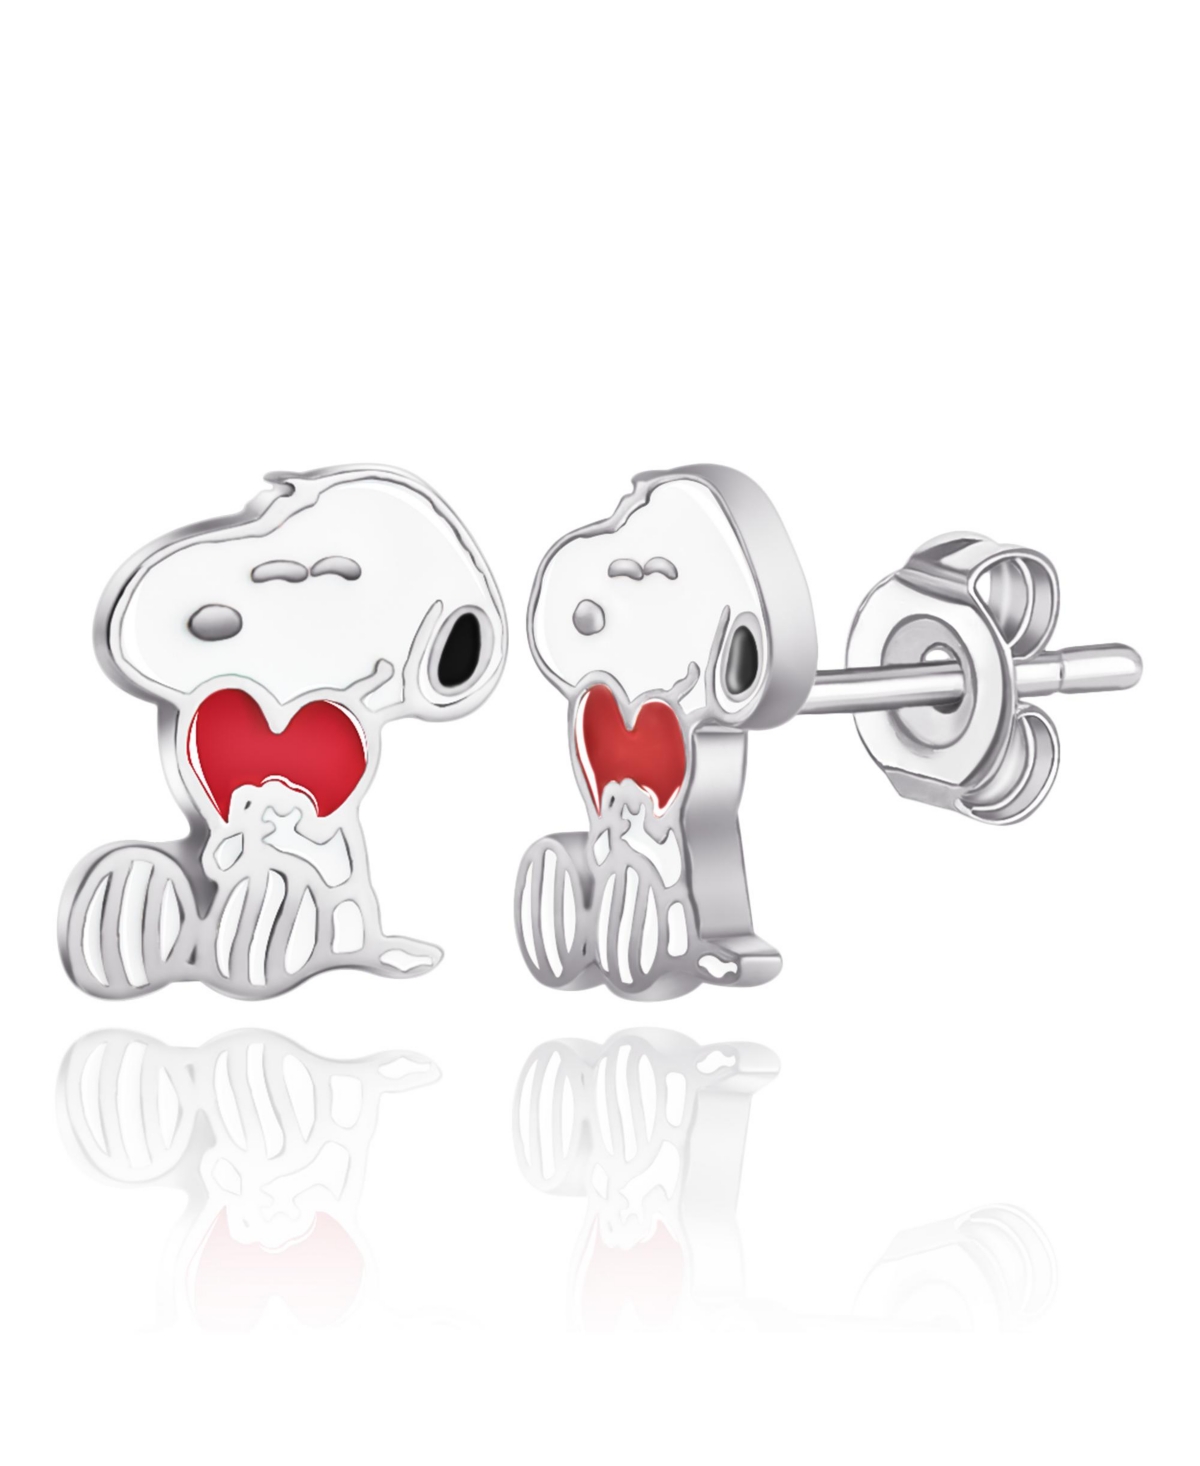 Silver Plated and Enamel Snoopy with Heart Stud Earrings - Silver, white, red